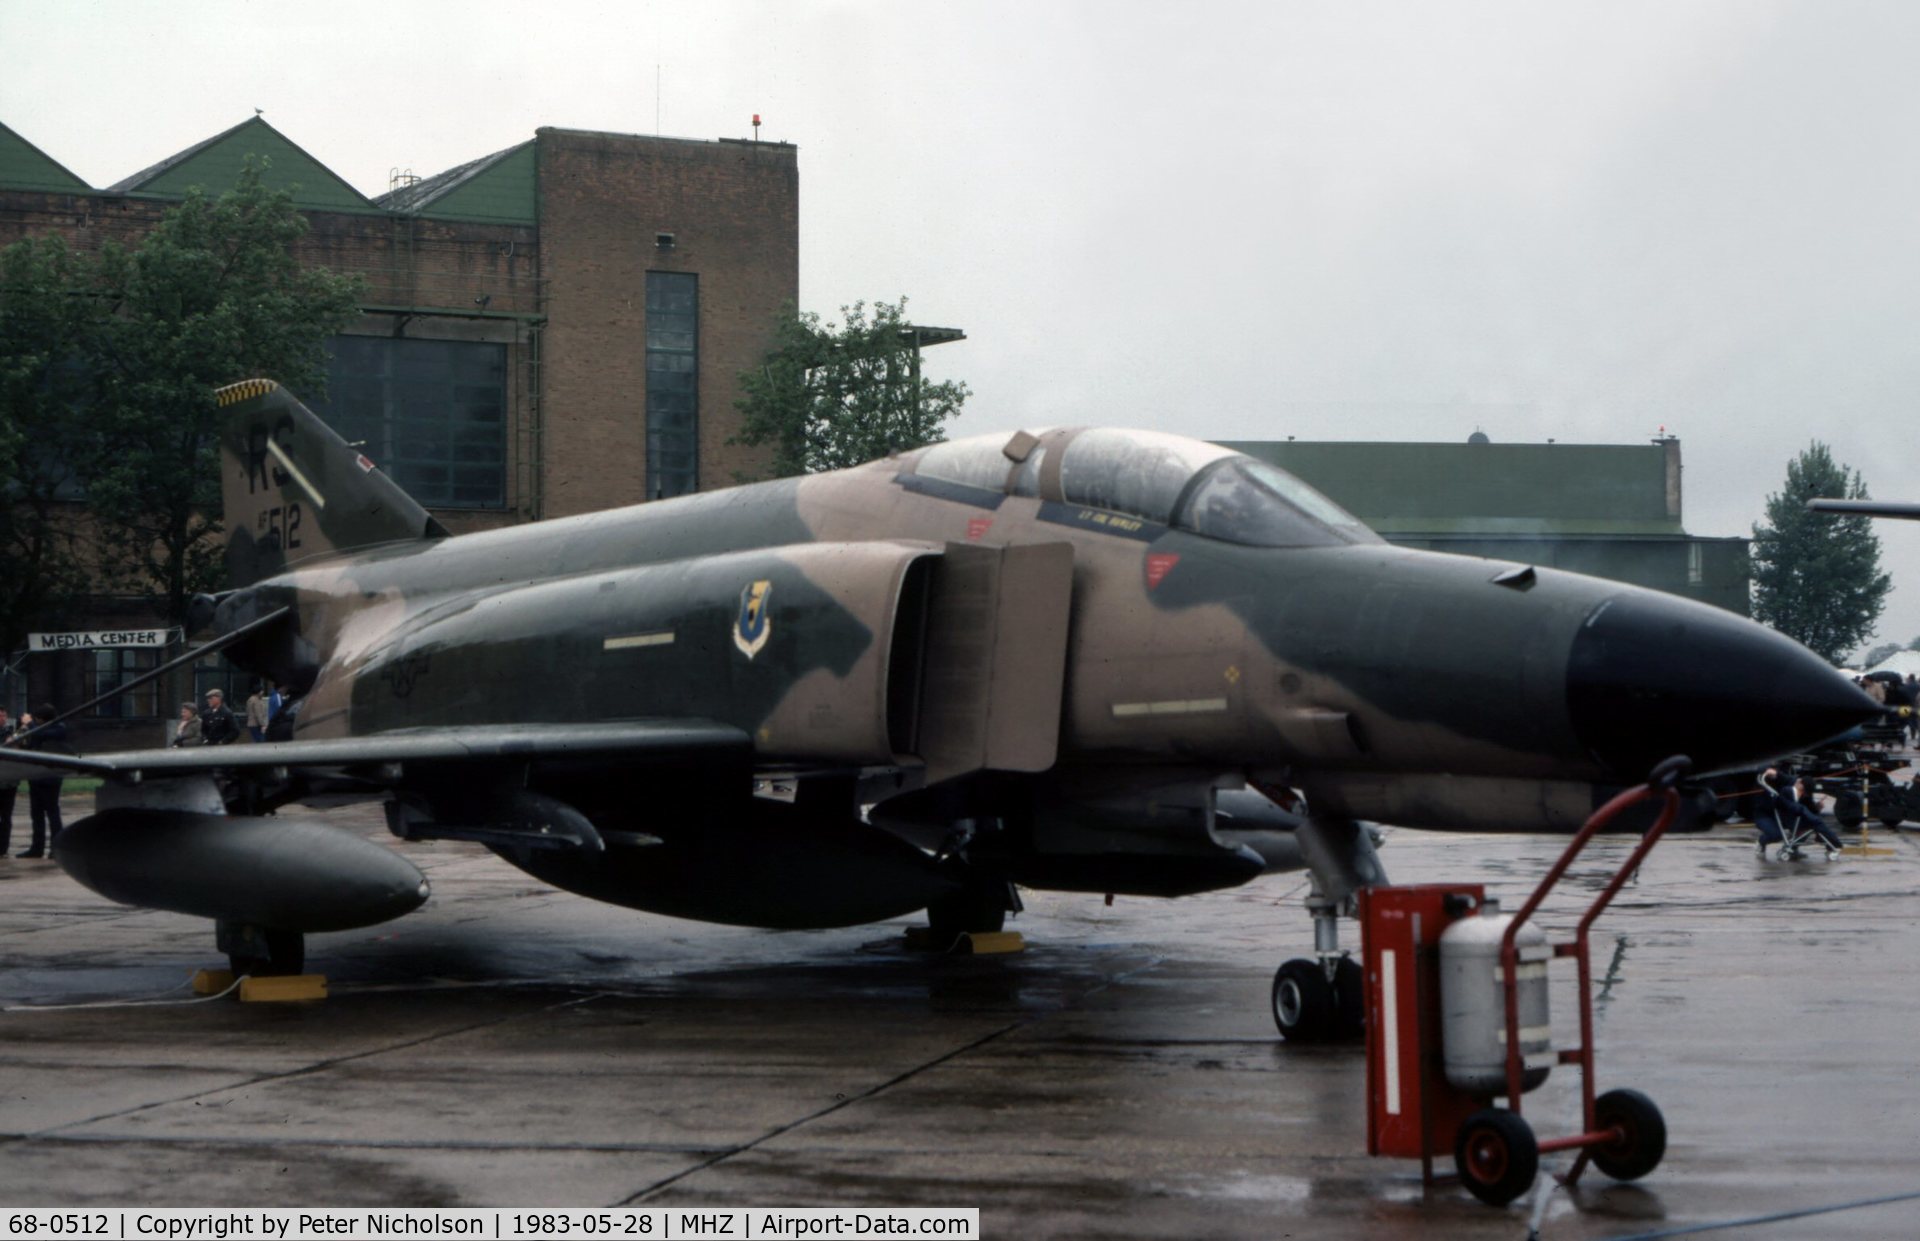 68-0512, 1968 McDonnell Douglas F-4E Phantom II C/N 3702, F-4E Phantom of the 86th Tactical Fighter Wing at Ramstein on display at the 1983 Mildenhall Air Fete.